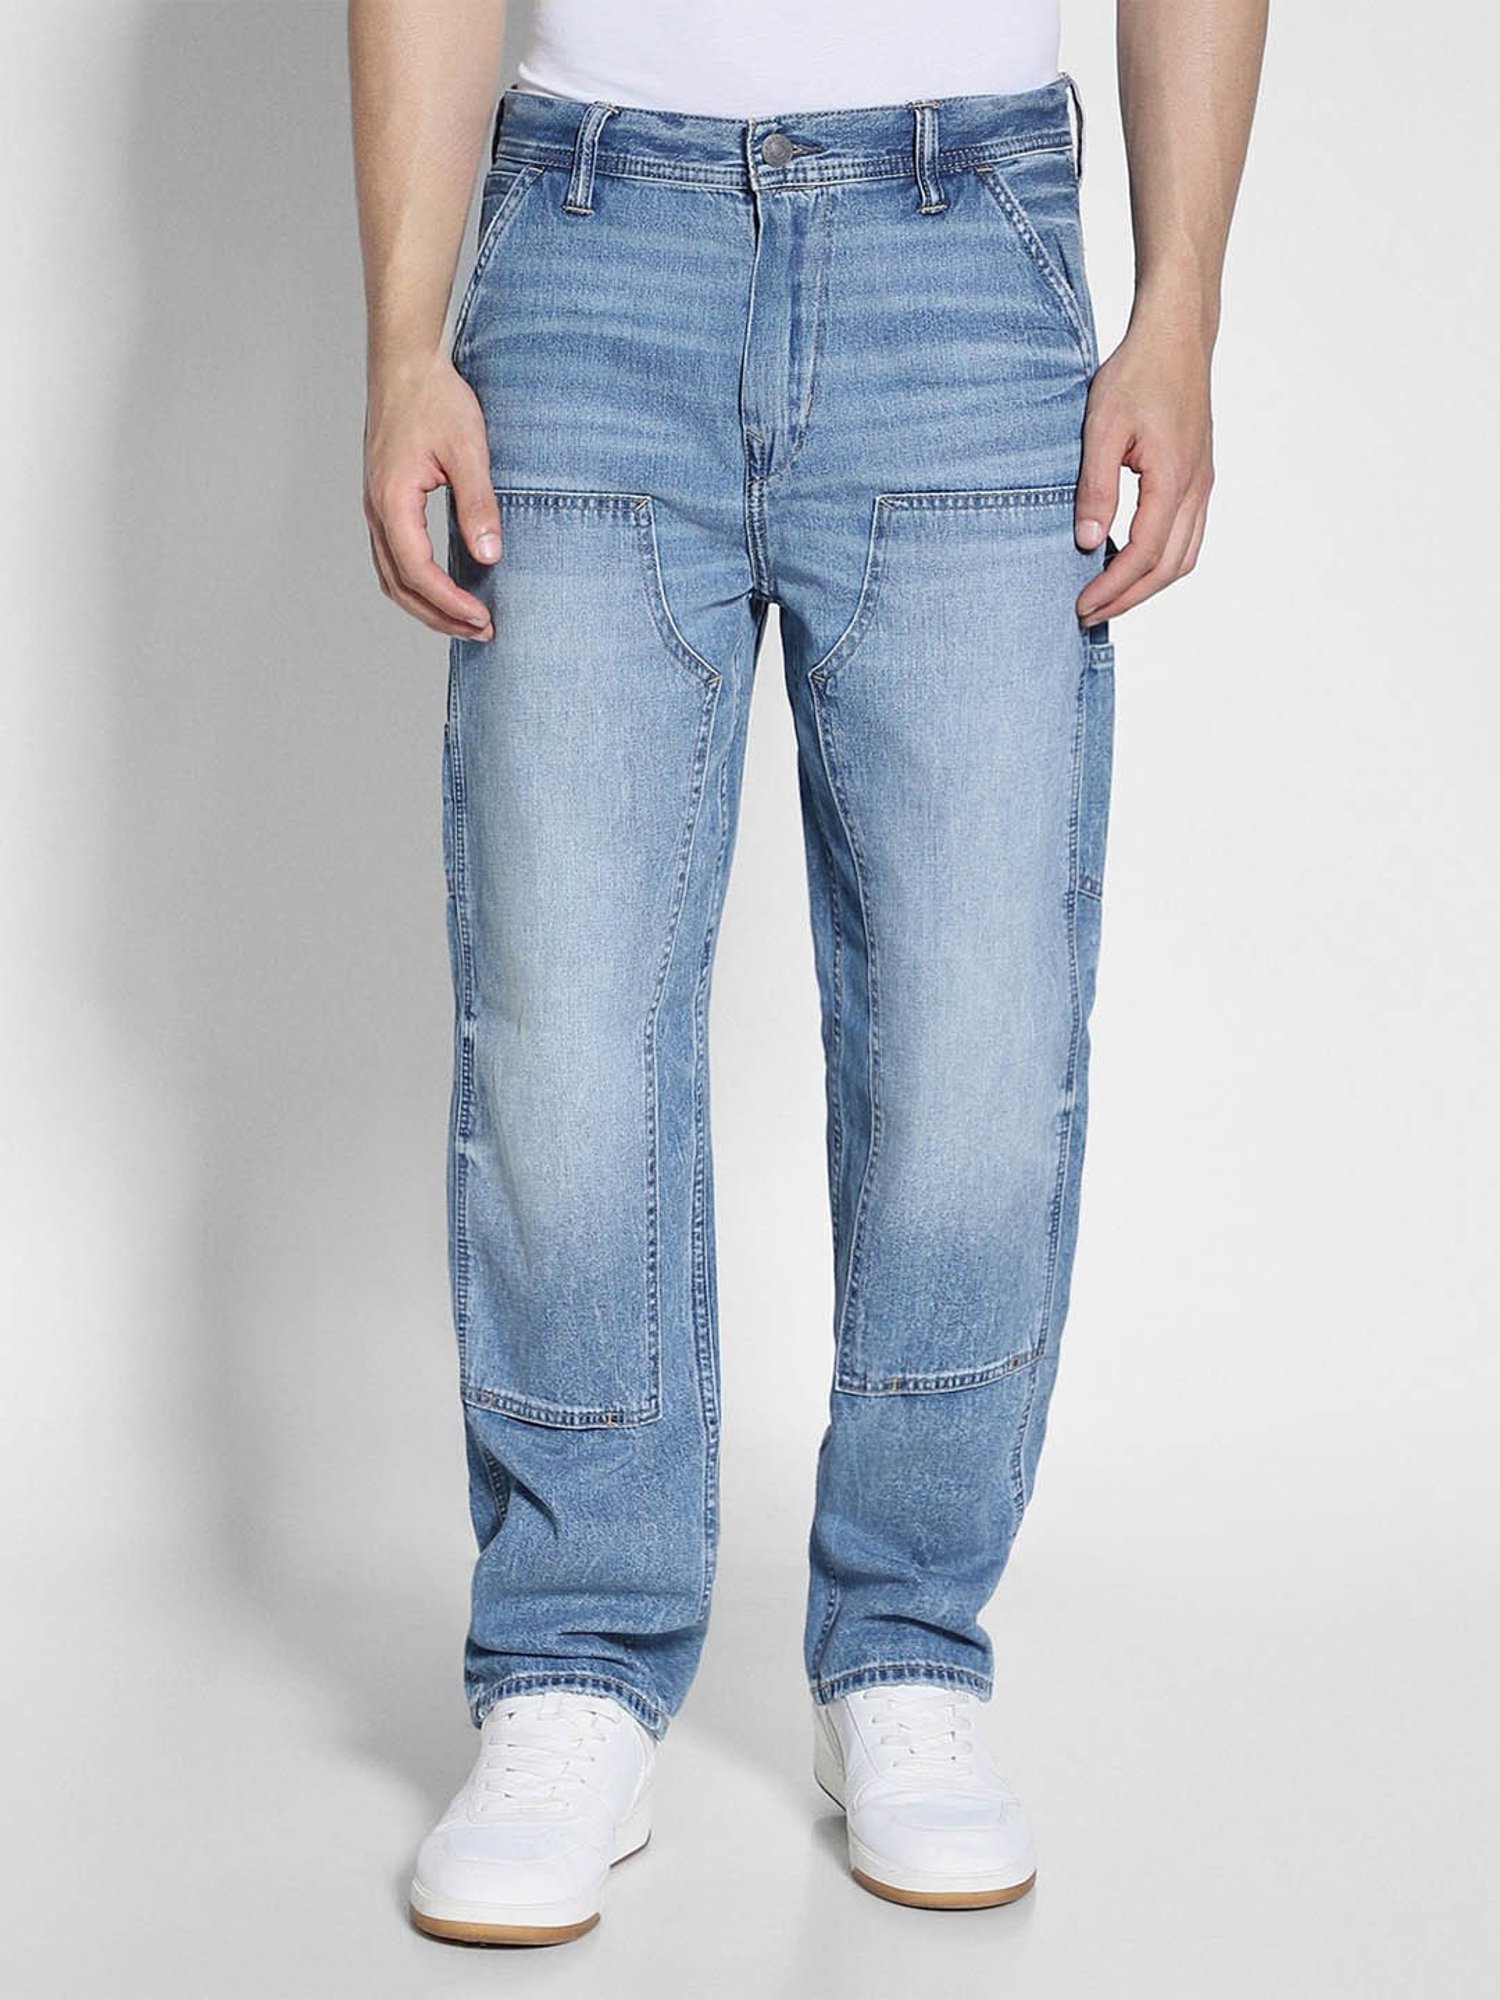 American Eagle jeans under 2500 